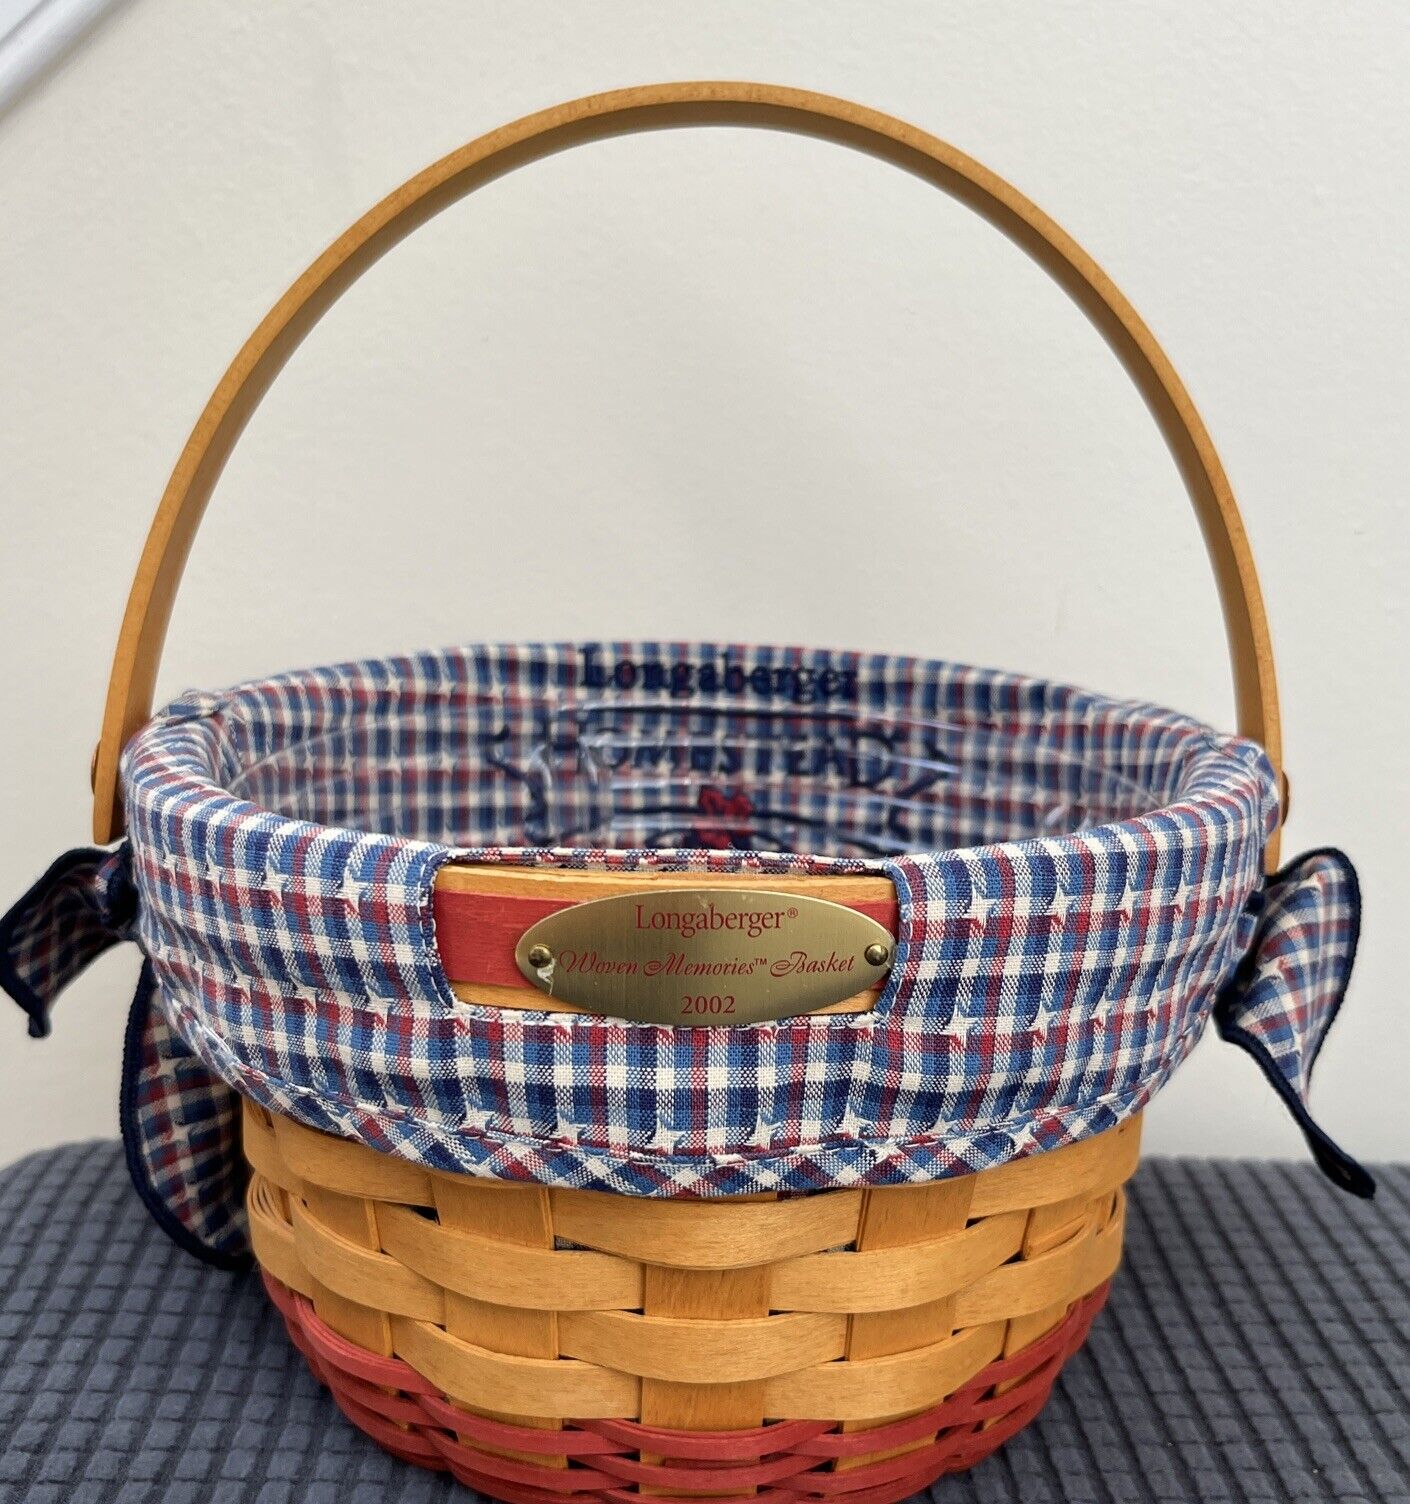 Longaberger Woven Memories Basket 2002 w Swing Handle 7 In Round/5 In Tall